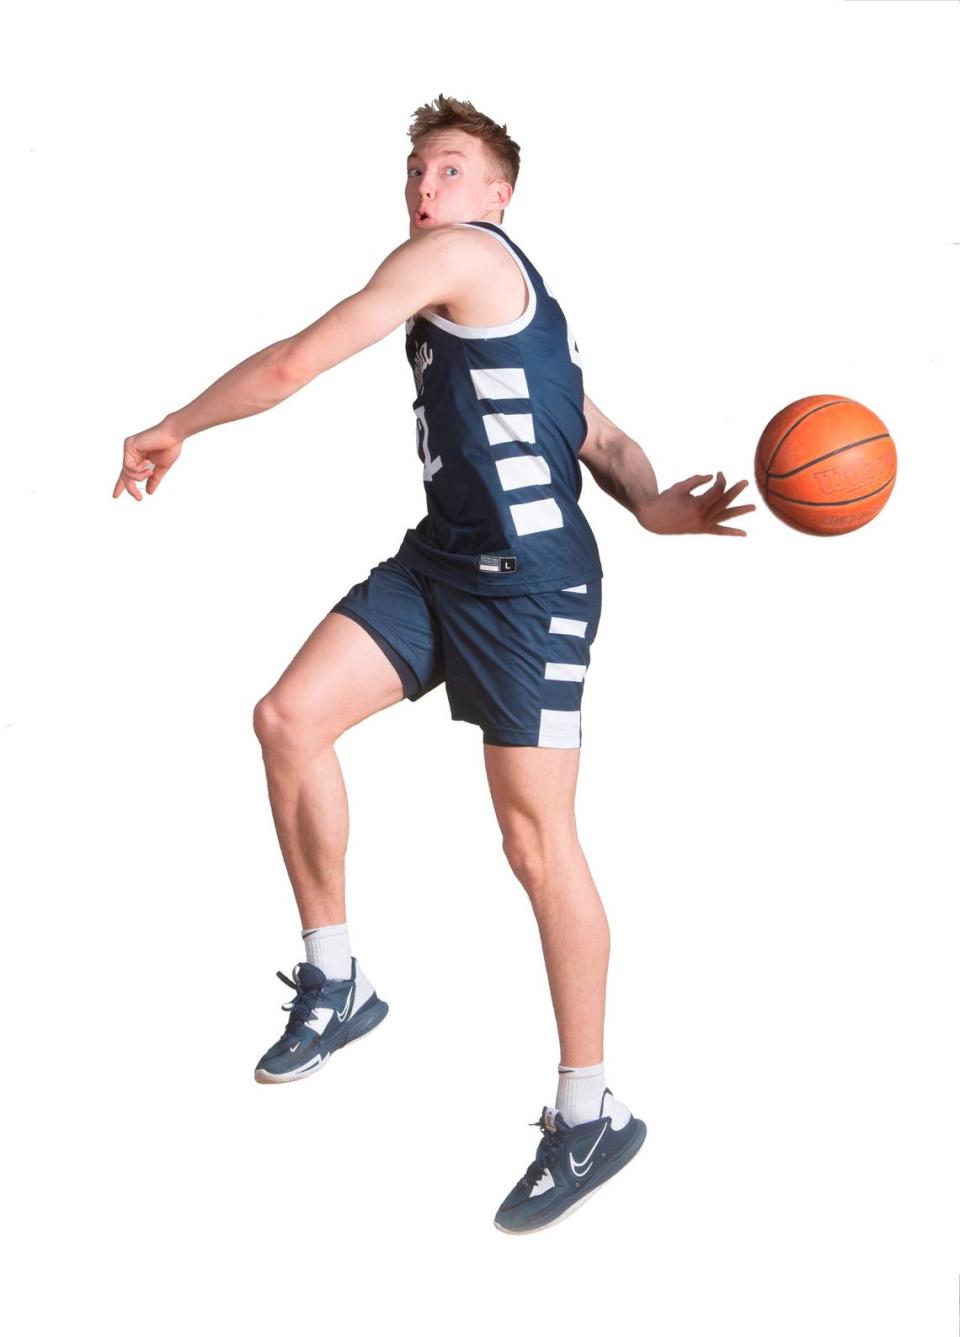 Olympia senior Parker Gerrits is one of six players named to The News Tribune’s All Area Boys Basketball Team. He is photographed at Curtis High School in University Place, Washington, on Saturday, March 11, 2023.